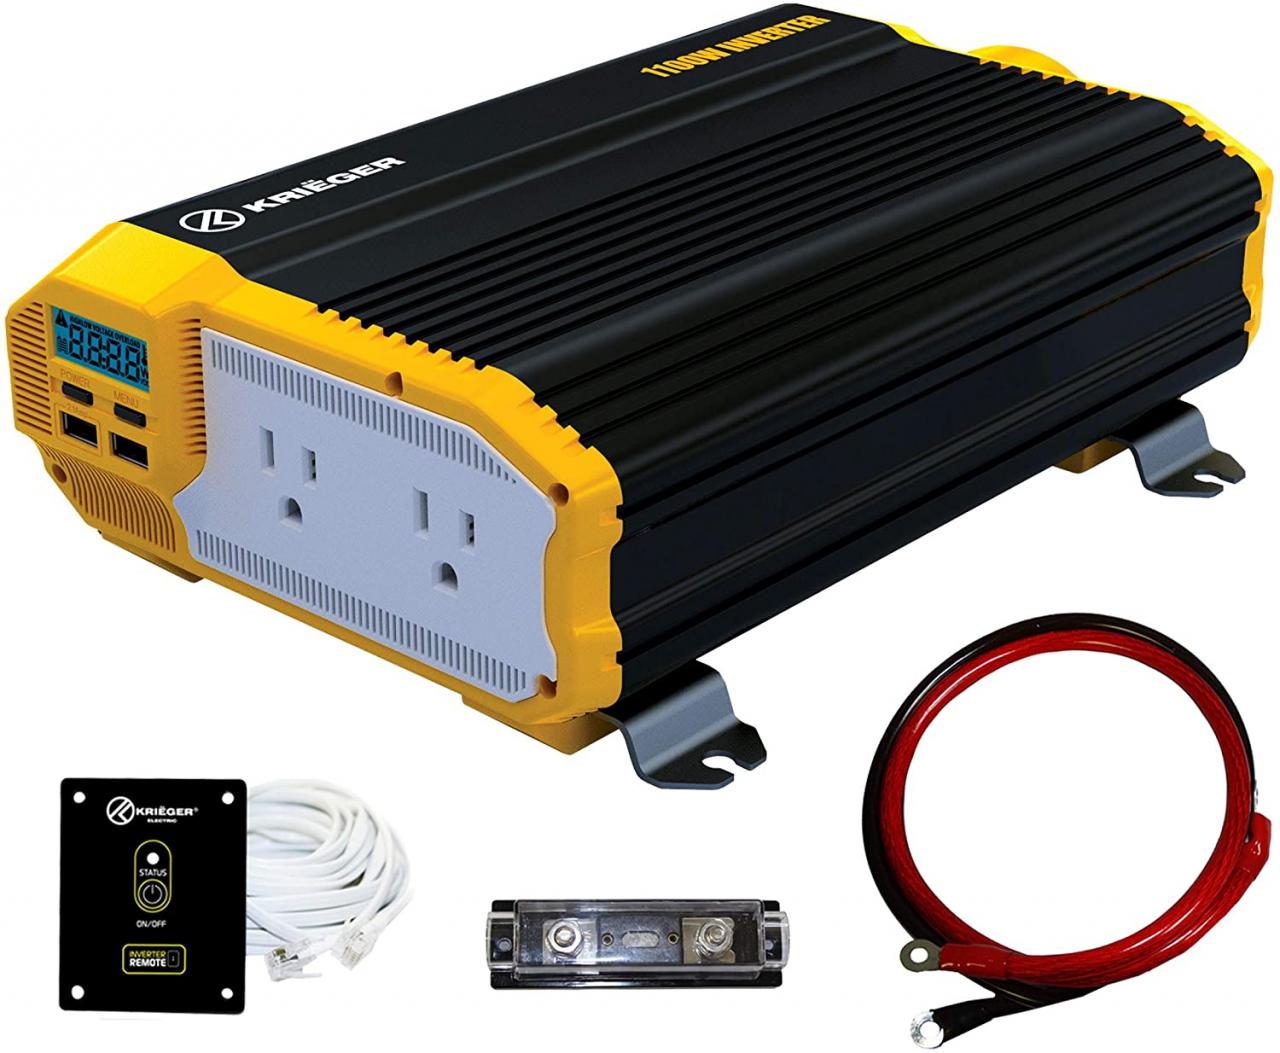 Buy KRIËGER 1100 Watt 12V Power Inverter Dual 110V AC Outlets, Installation  Kit Included, Automotive Back Up Power Supply For Blenders, Vacuums, Power  Tools MET Approved According to UL and CSA Online